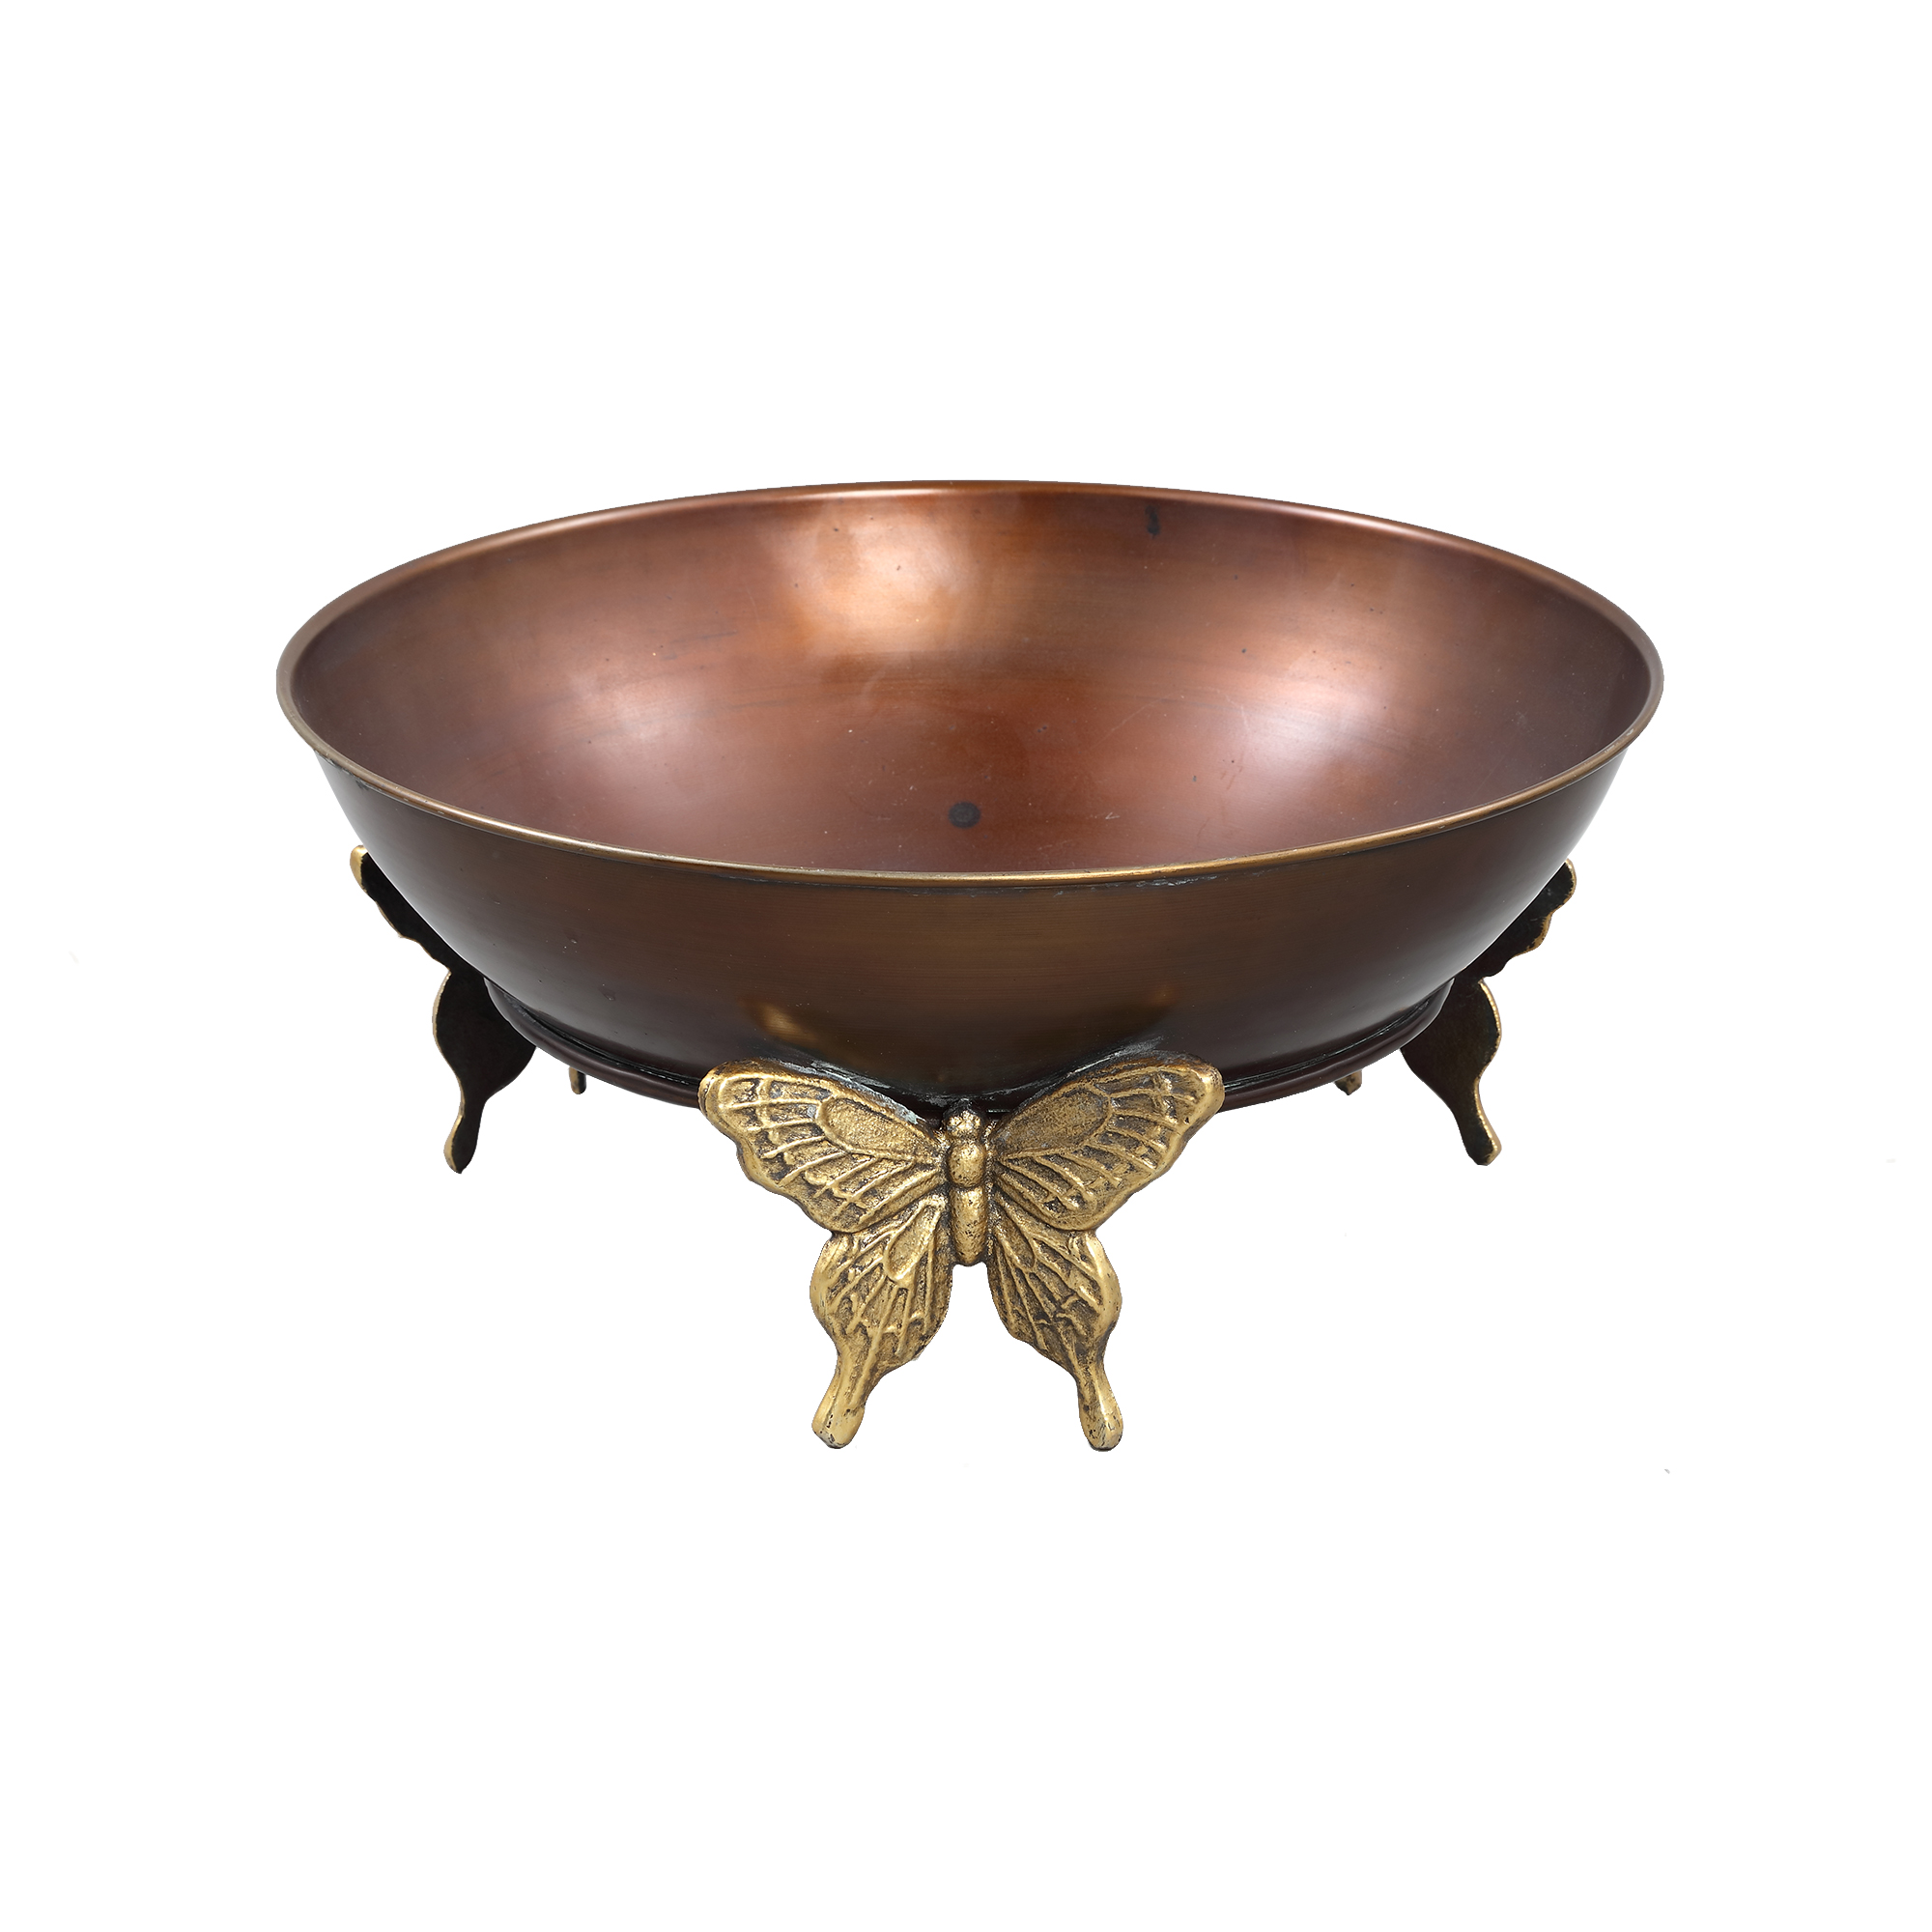 Tiana Copper metal bowl bith butterfly bottom